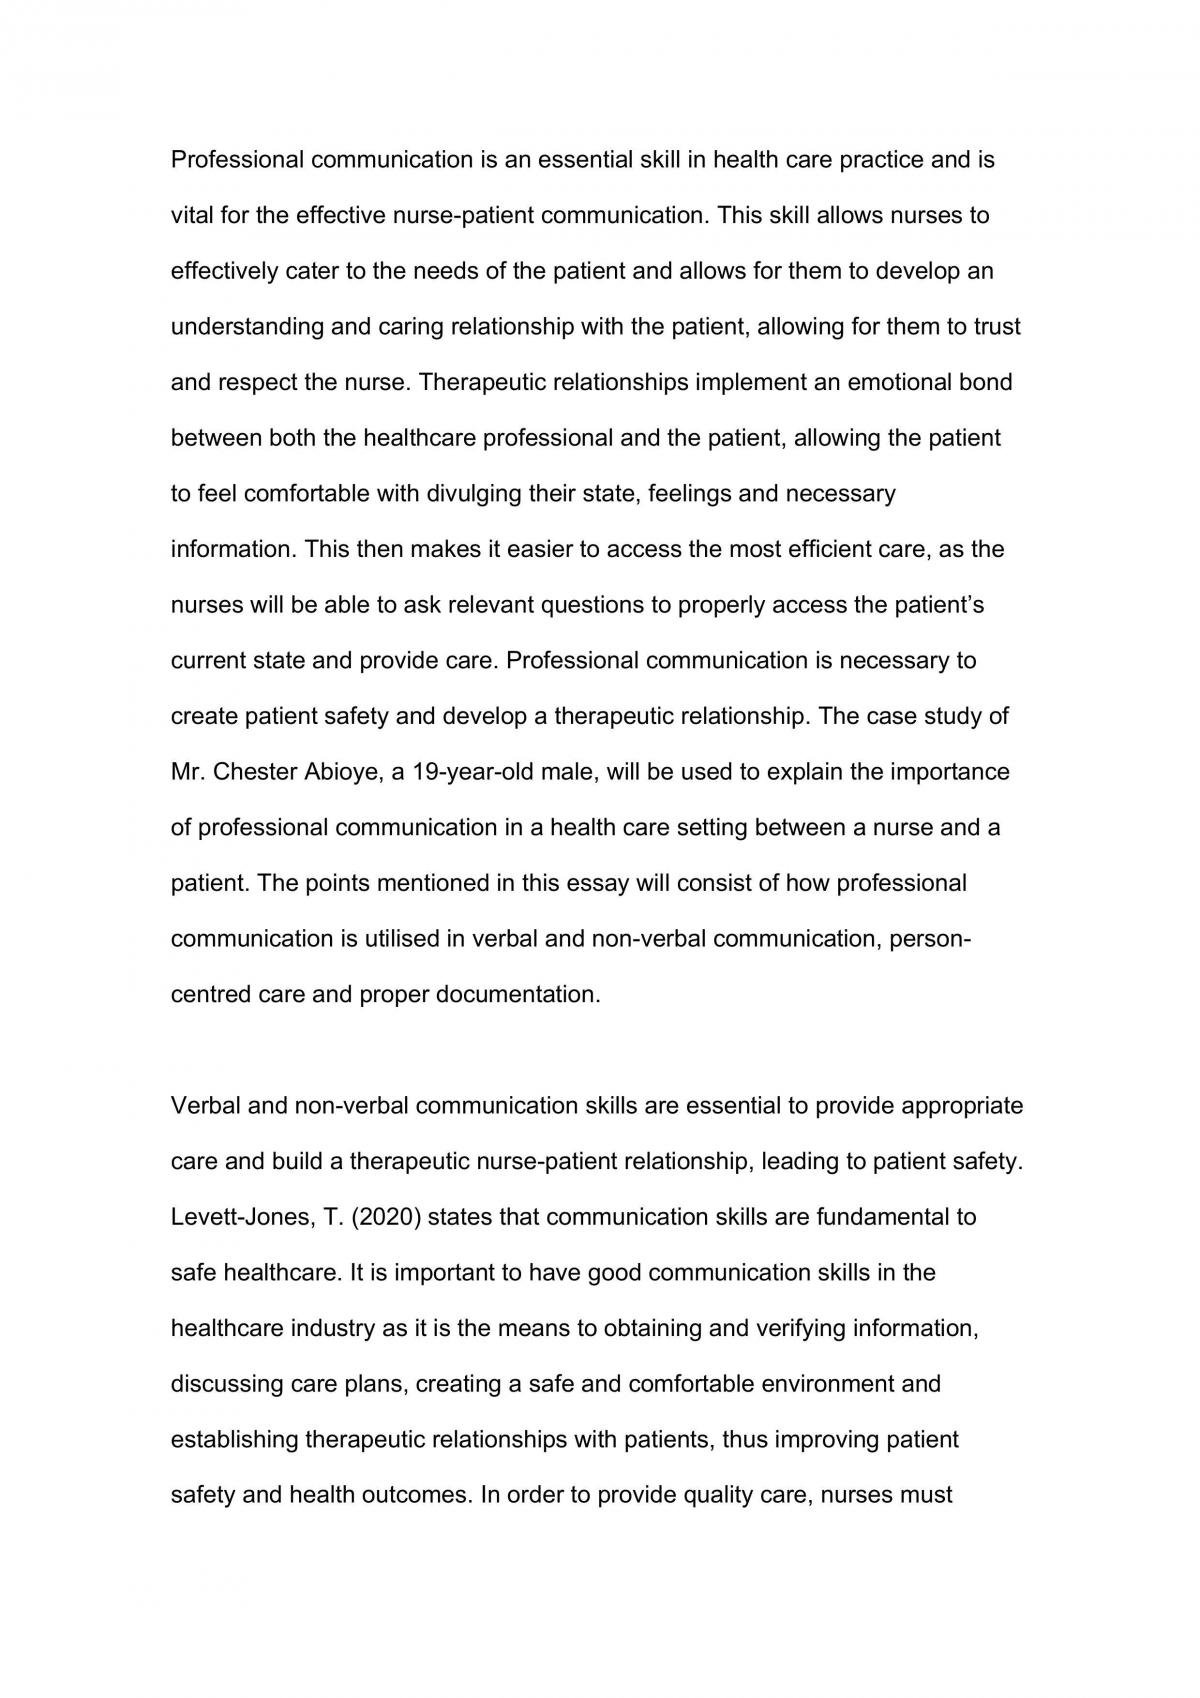 401205 Assessment 2 Essay - Page 1